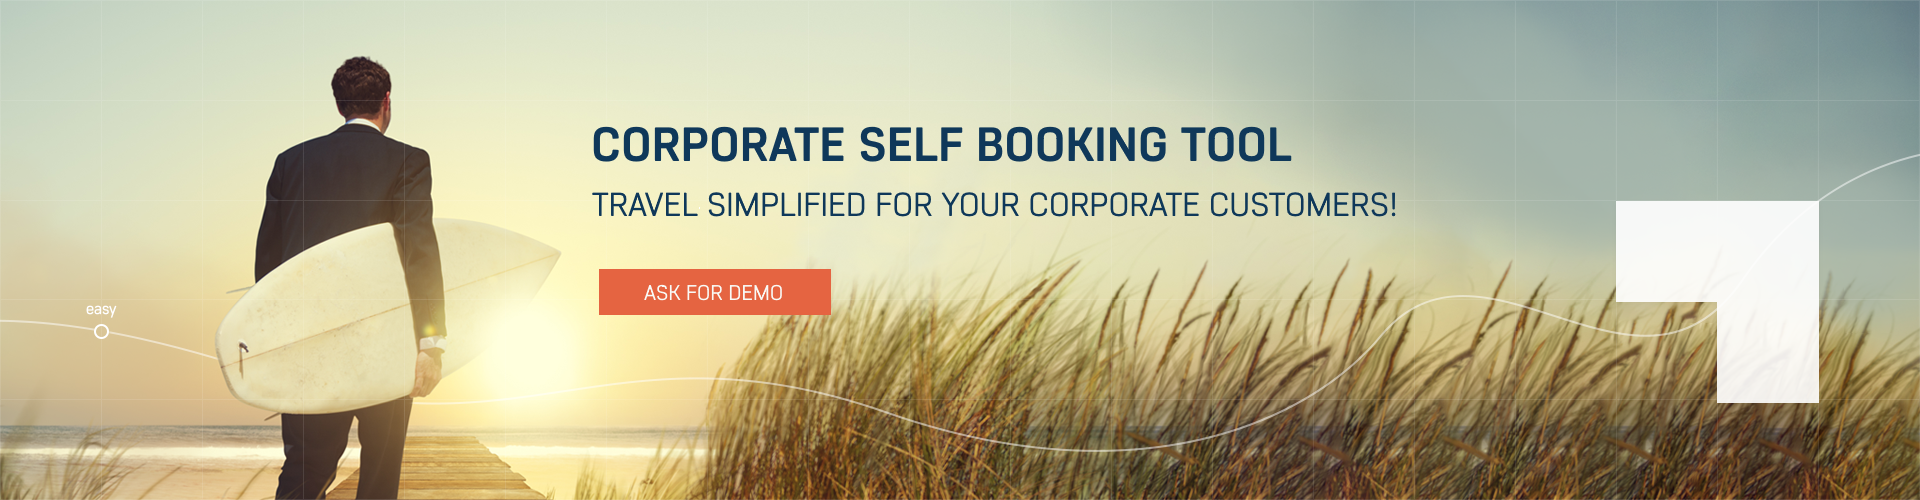 Corporate Self Booking Tool Features